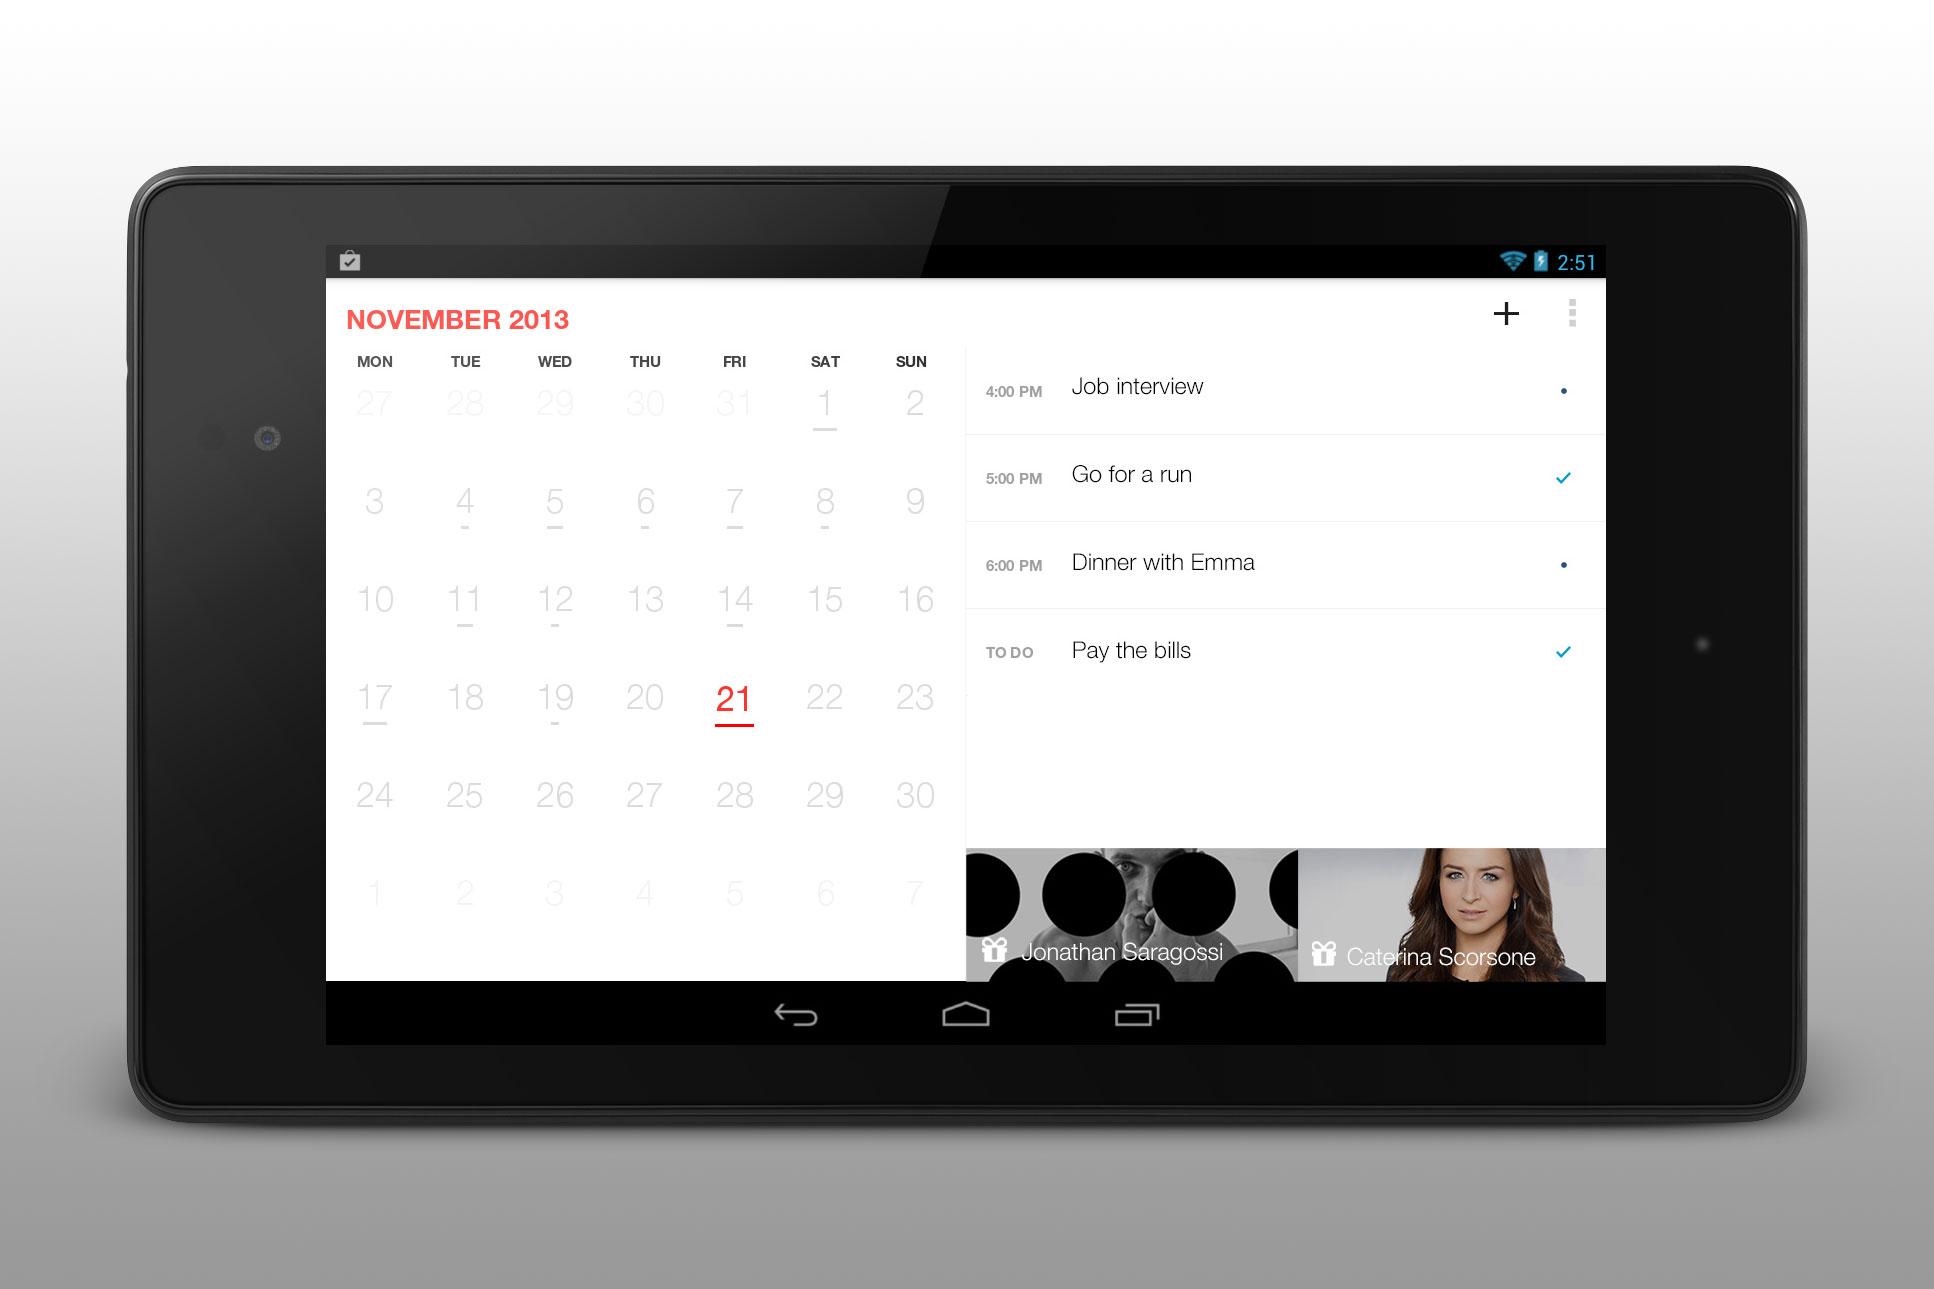 Cal Google Calendar + Widget (Android) reviews at Android Quality Index